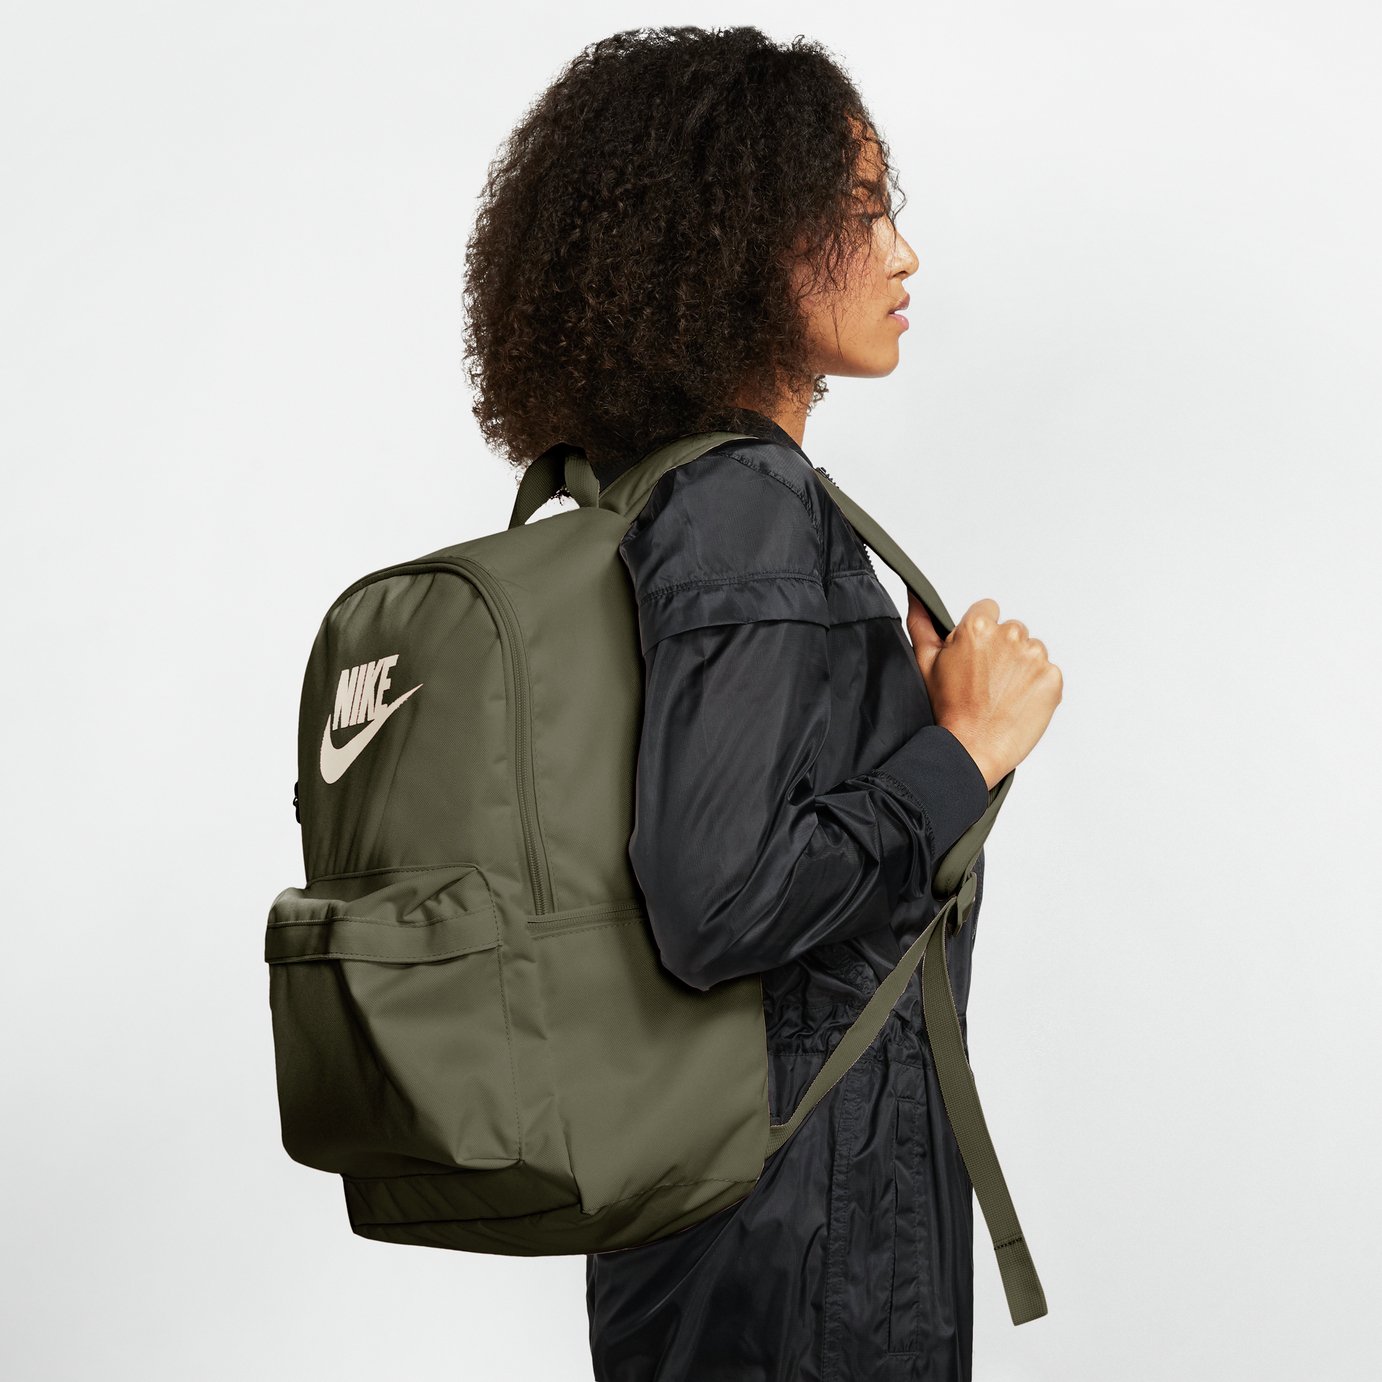 Nike Heritage 2.0 25L Backpack Review